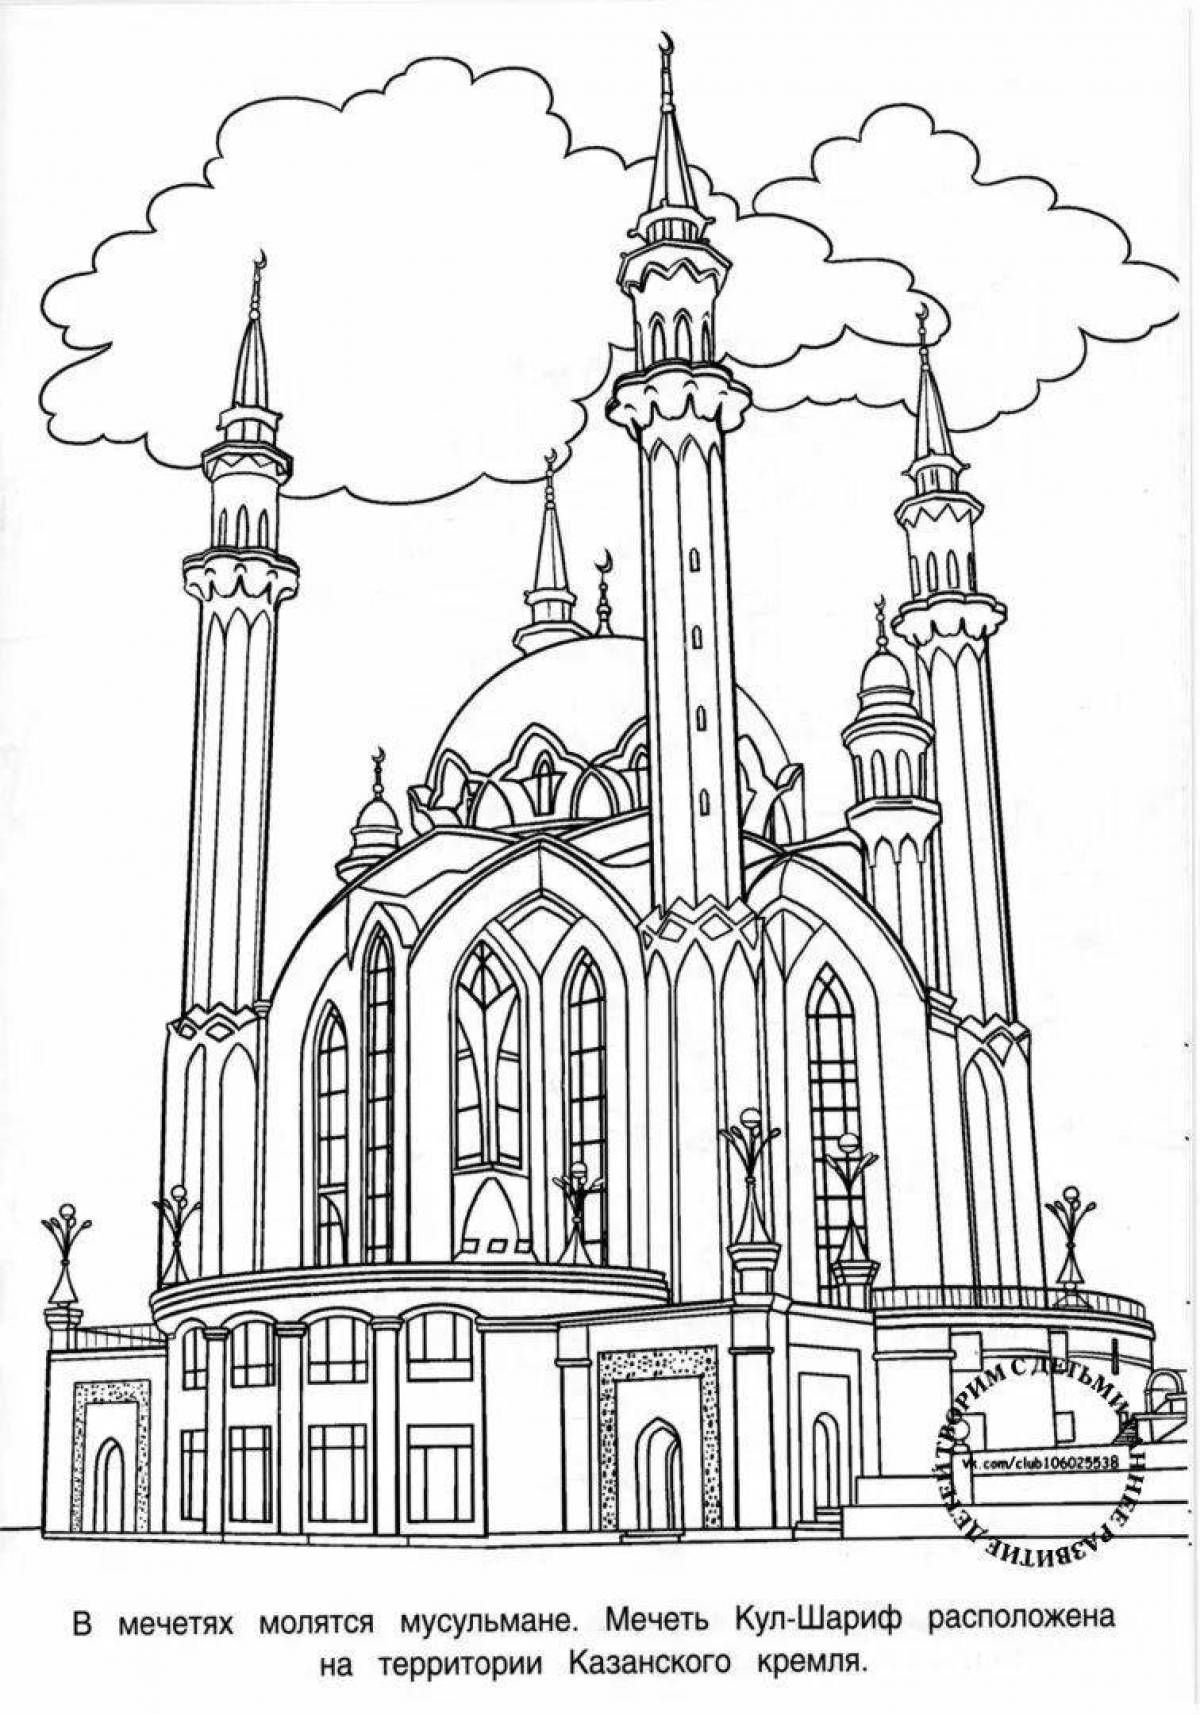 Great Kazan coloring book for students